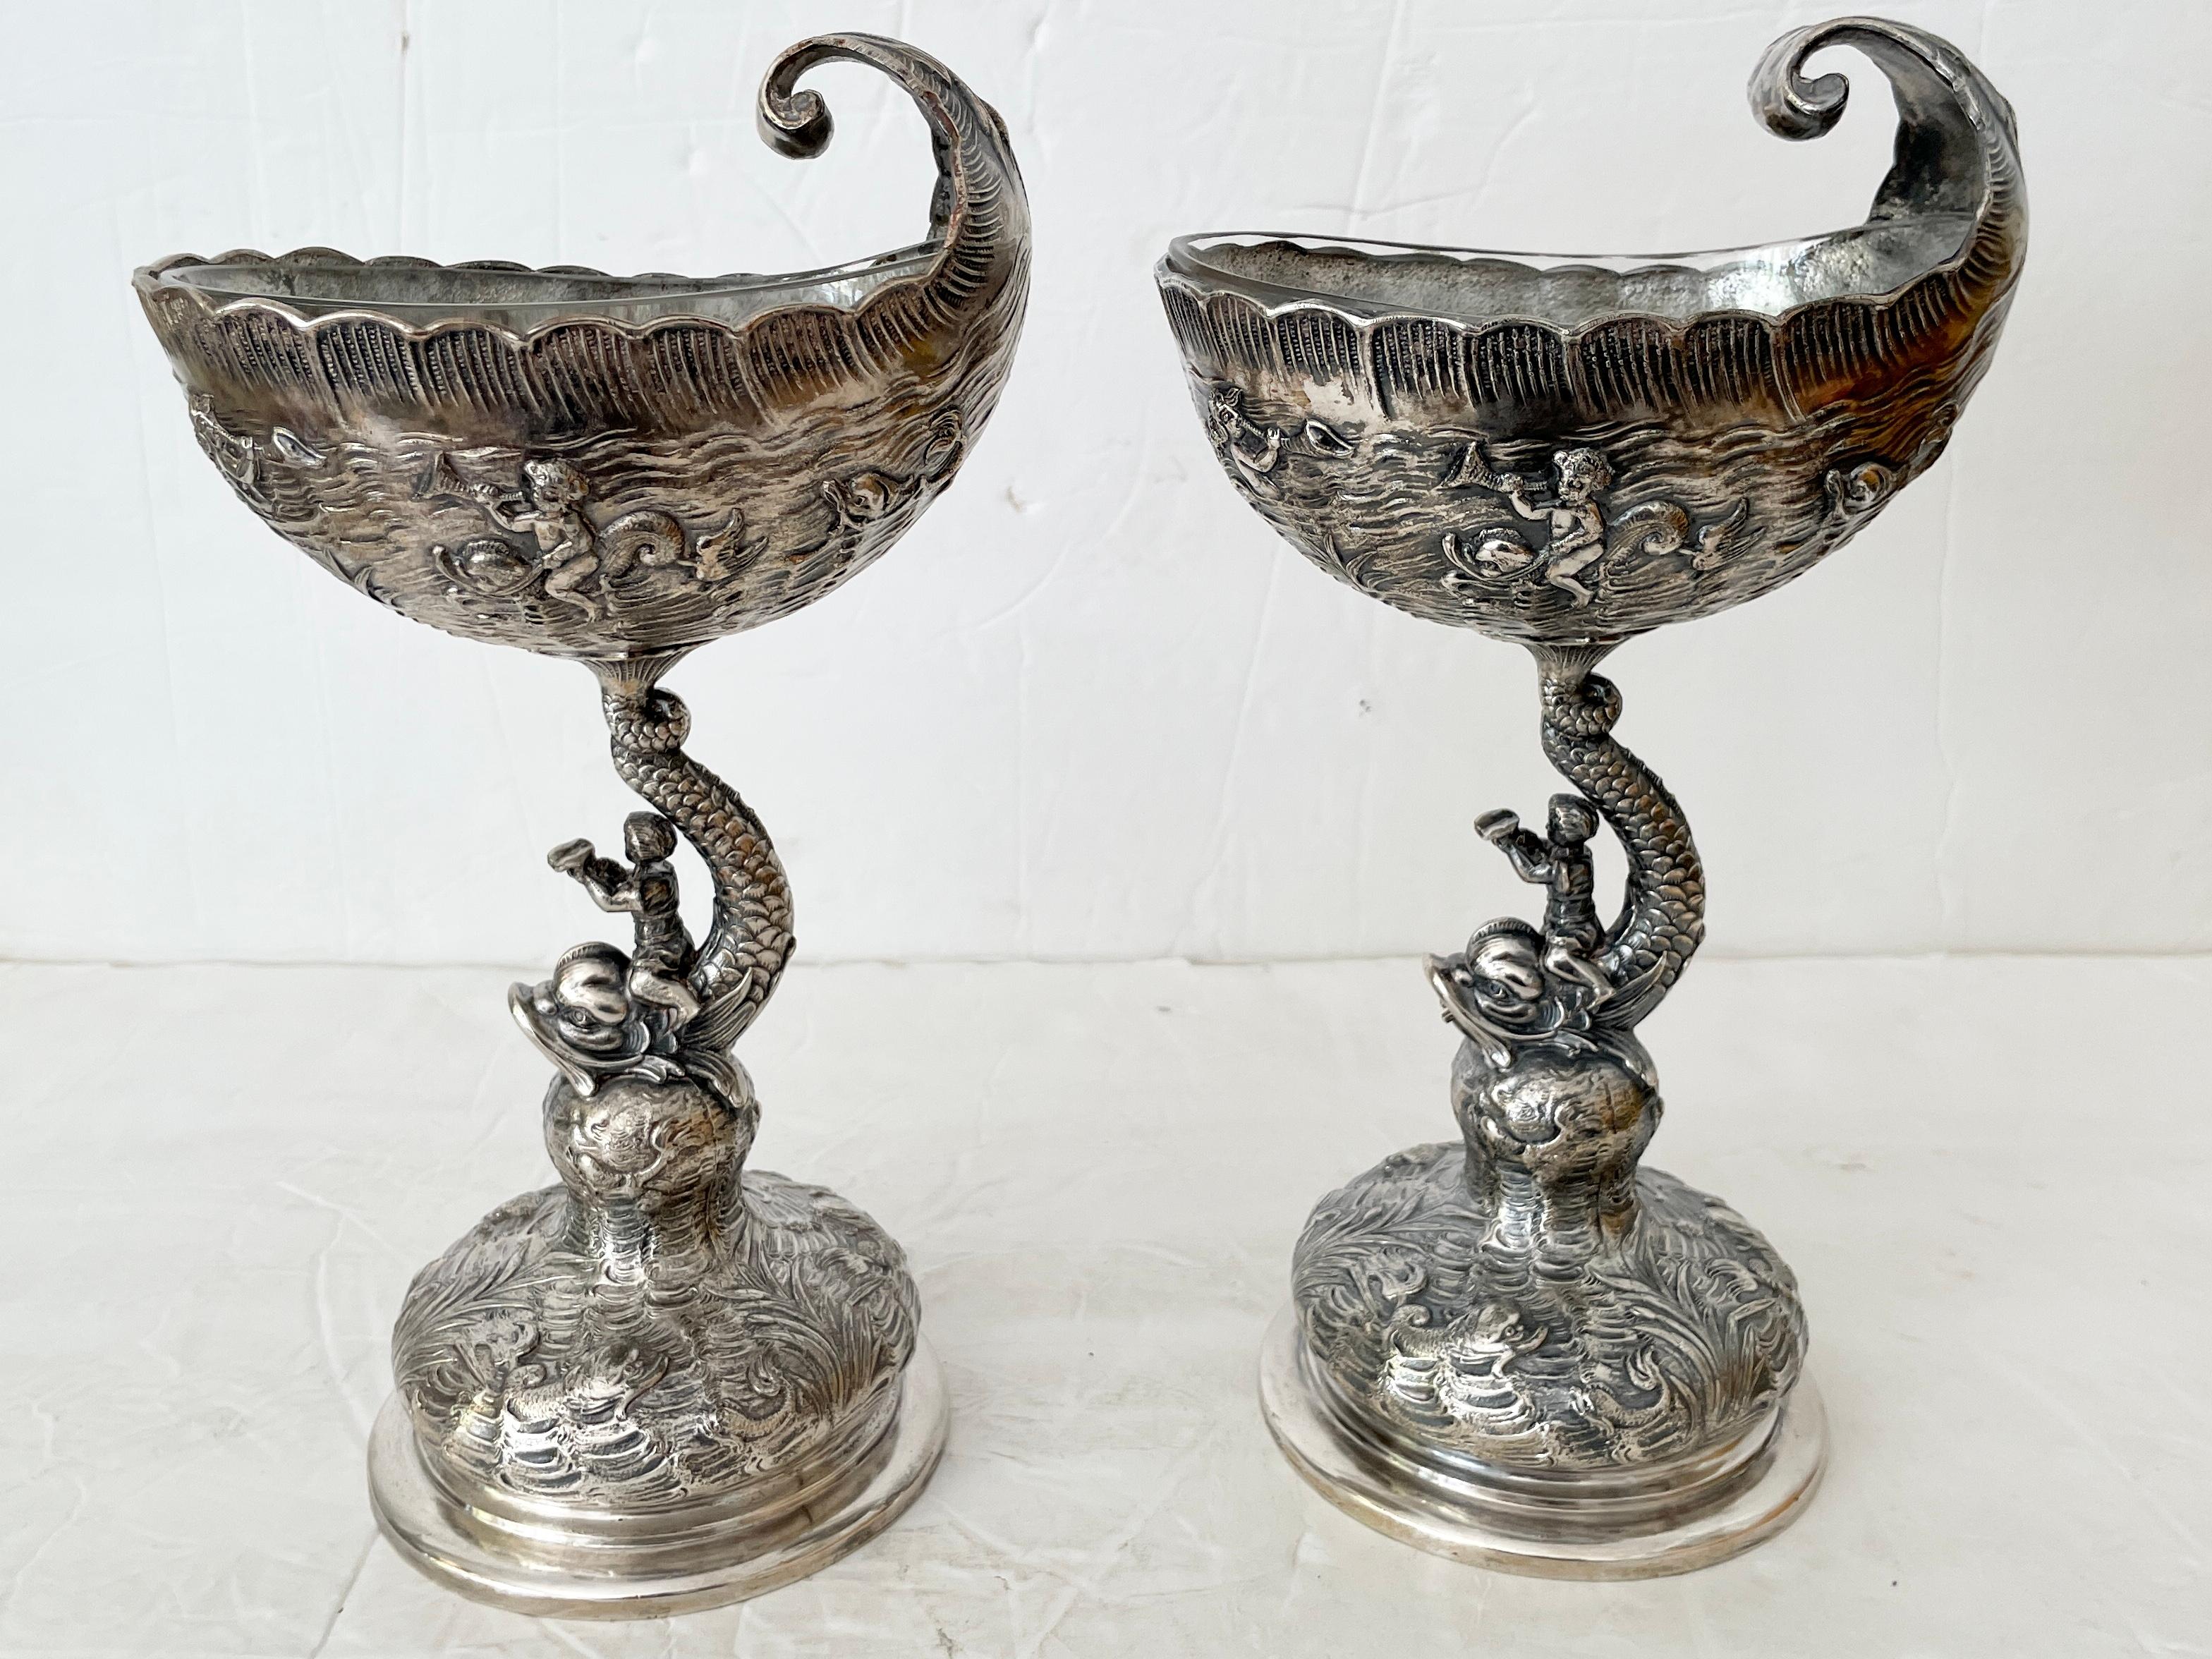 Beautiful pair of metal footed dish grotto style with men riding giant fish figurines. This pair includes a glass insert. Great carving details.